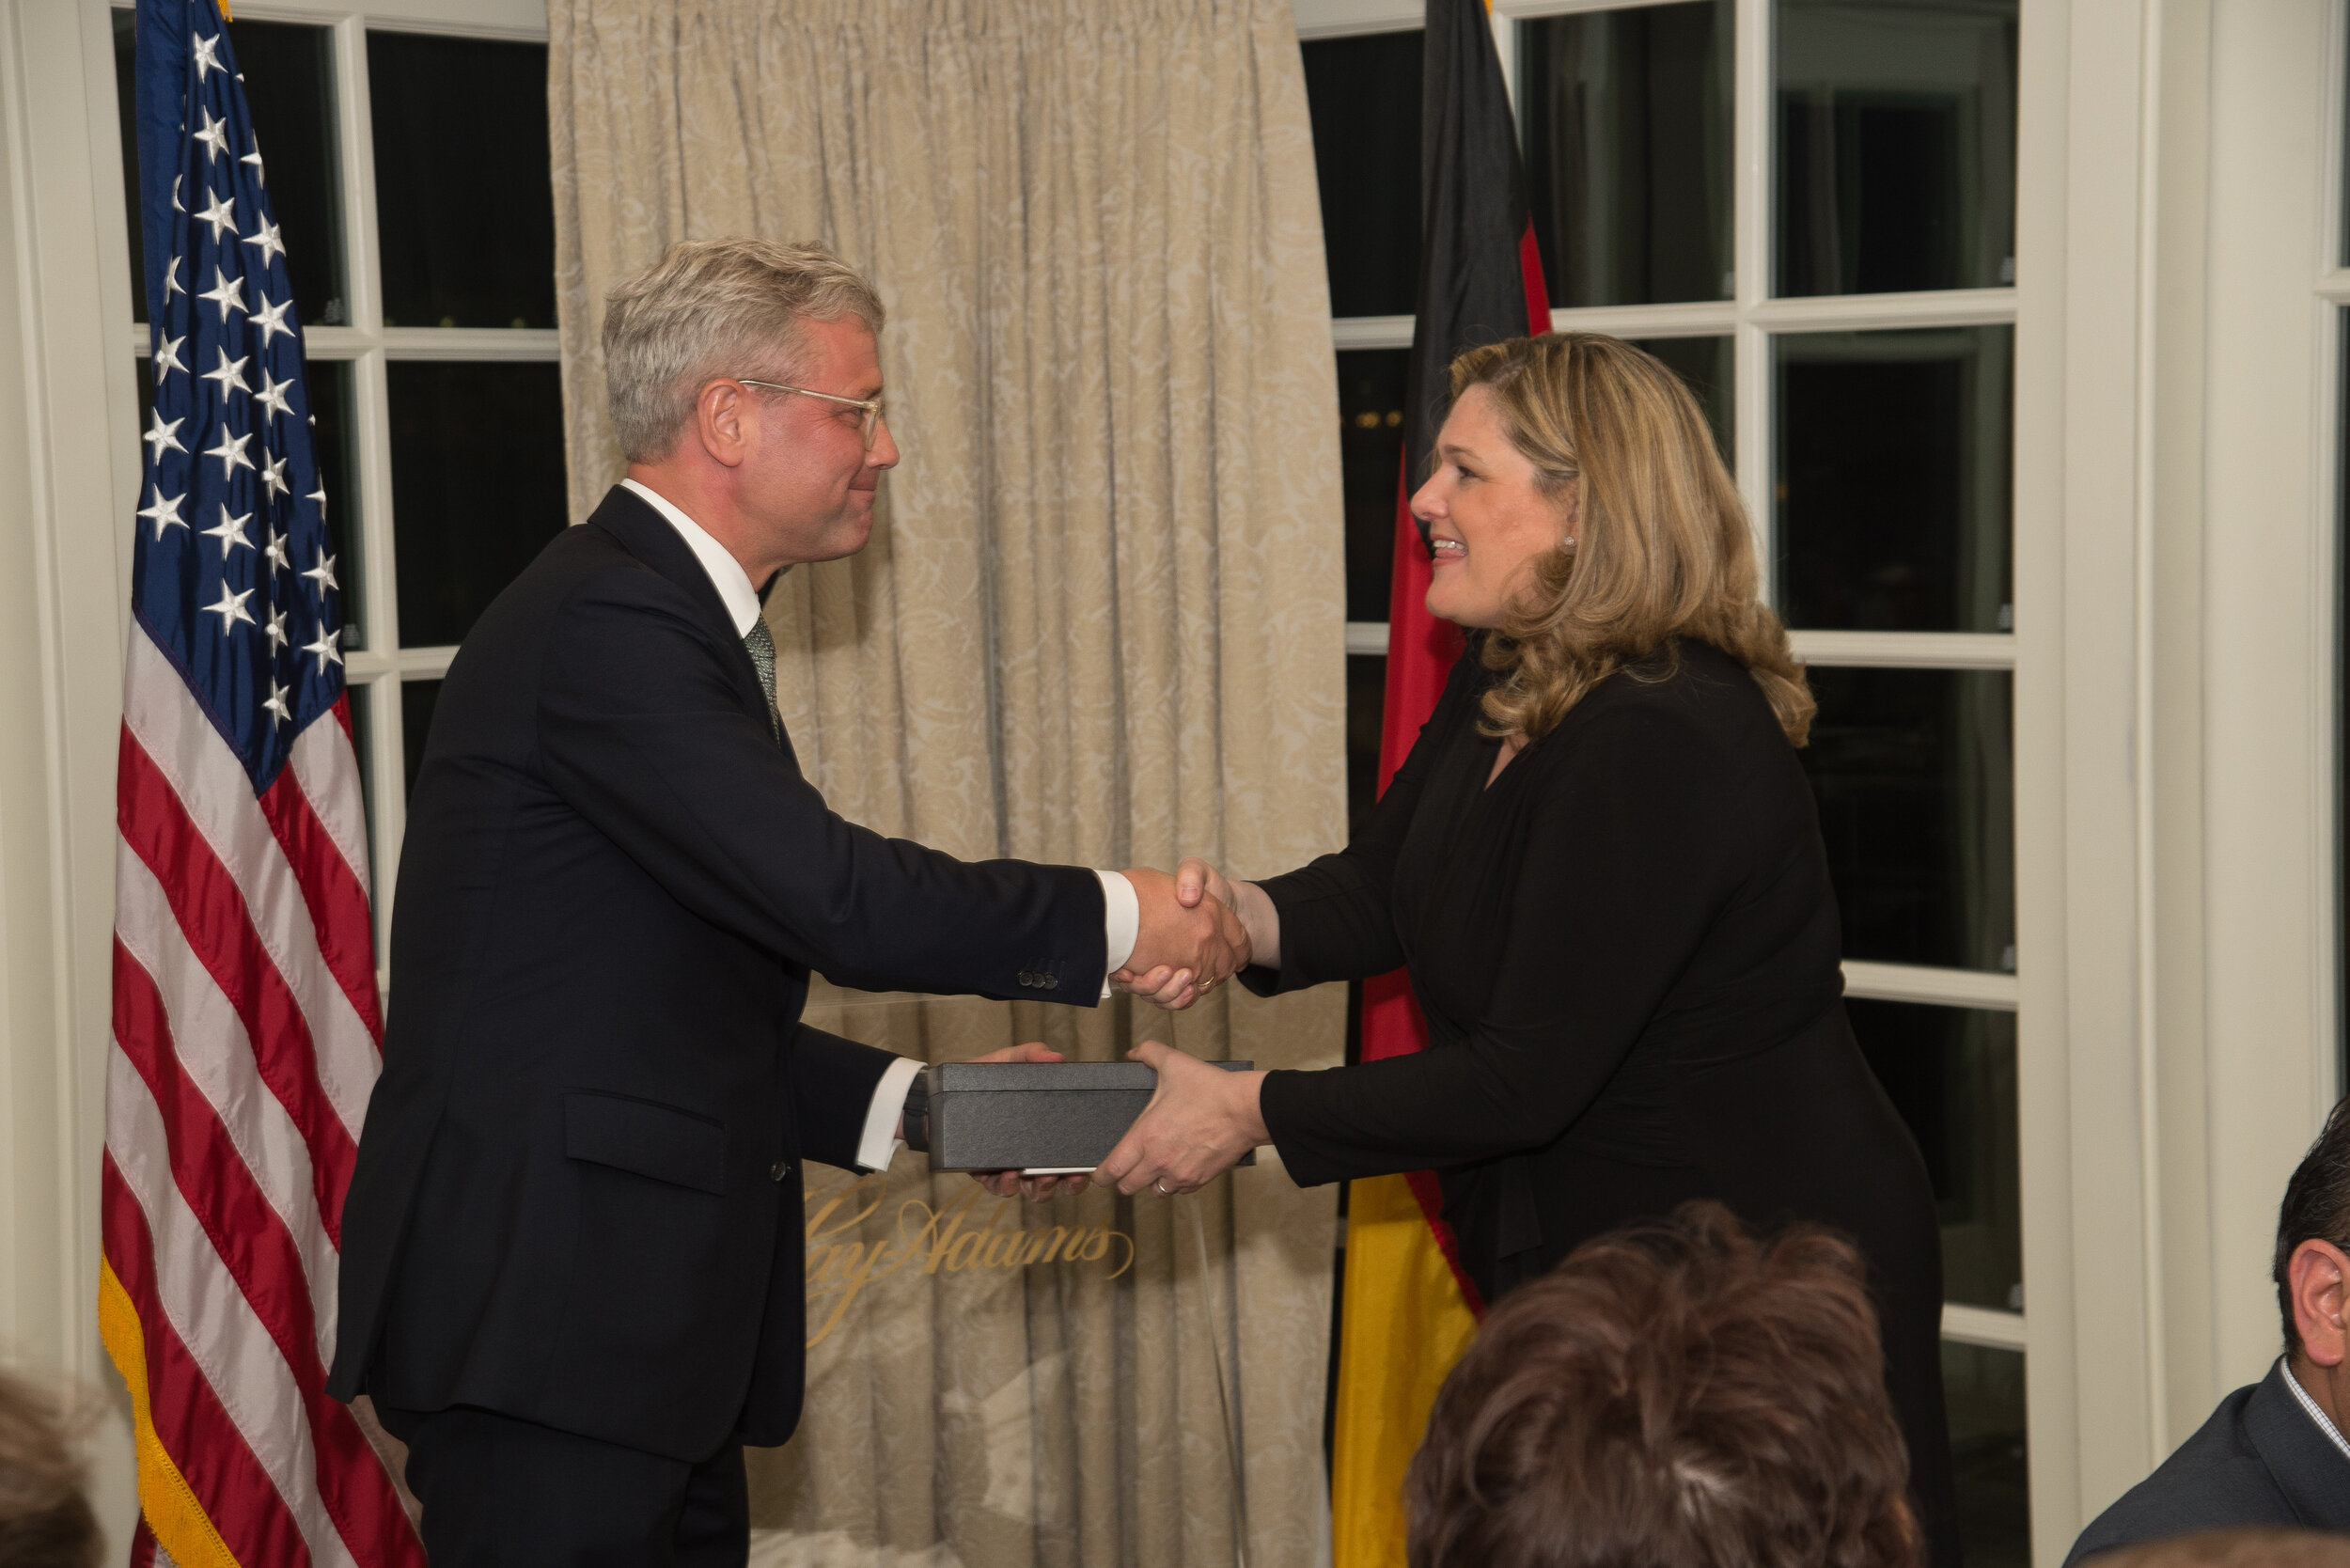  Dr. Norbert Röttgen, Chairman of the Foreign Affairs Committee in the Bundestag, receiving Leadership Award in 2015 